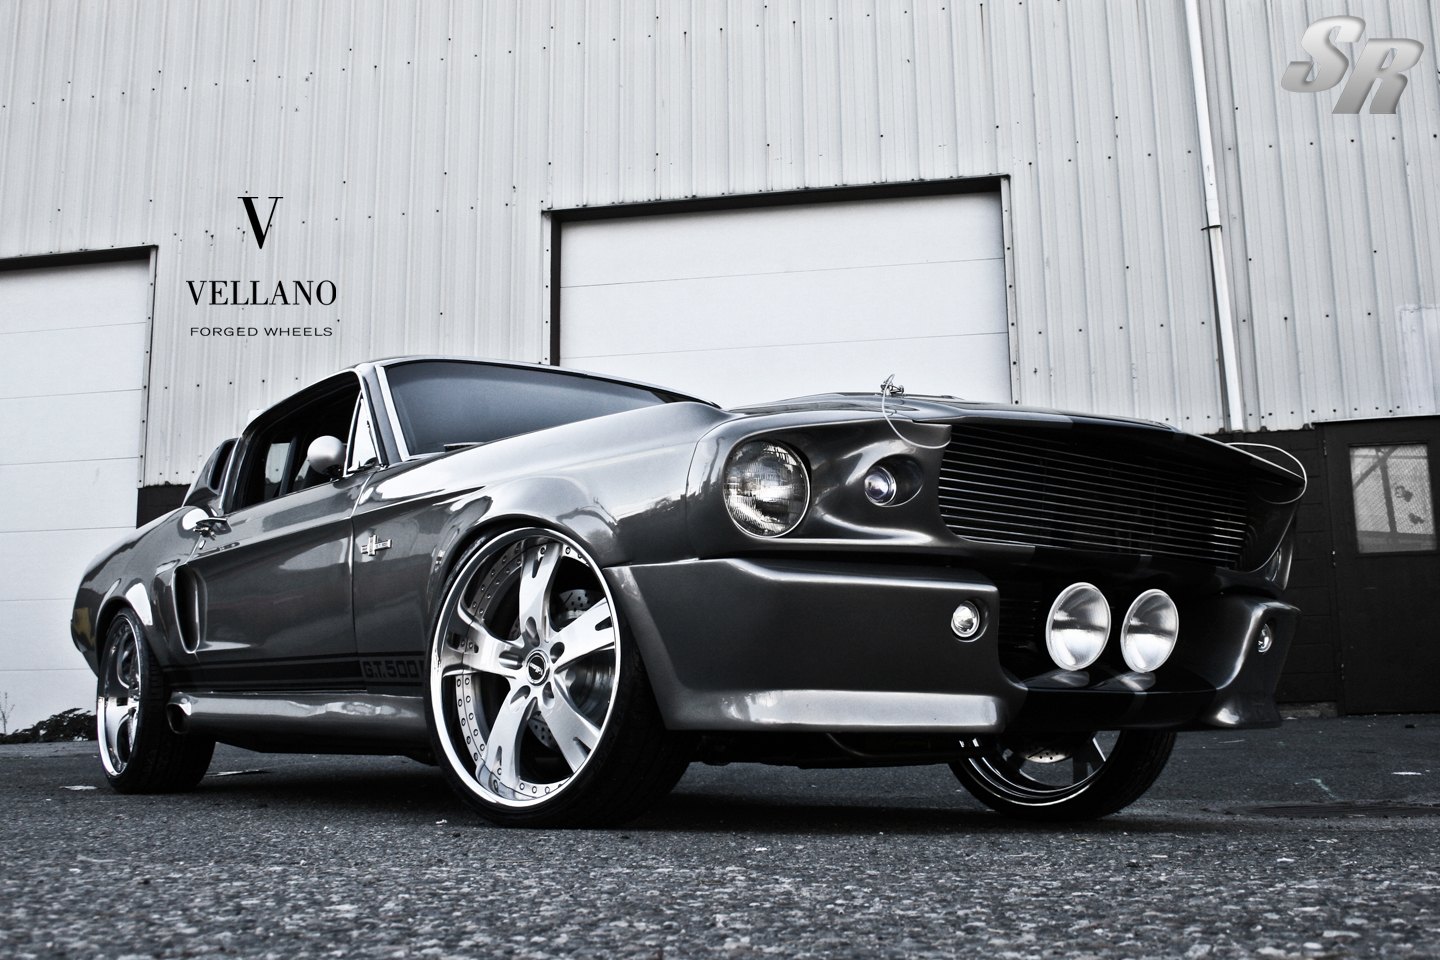 Ford Mustang Cobra with Forged Wheels - Photo by Vellano